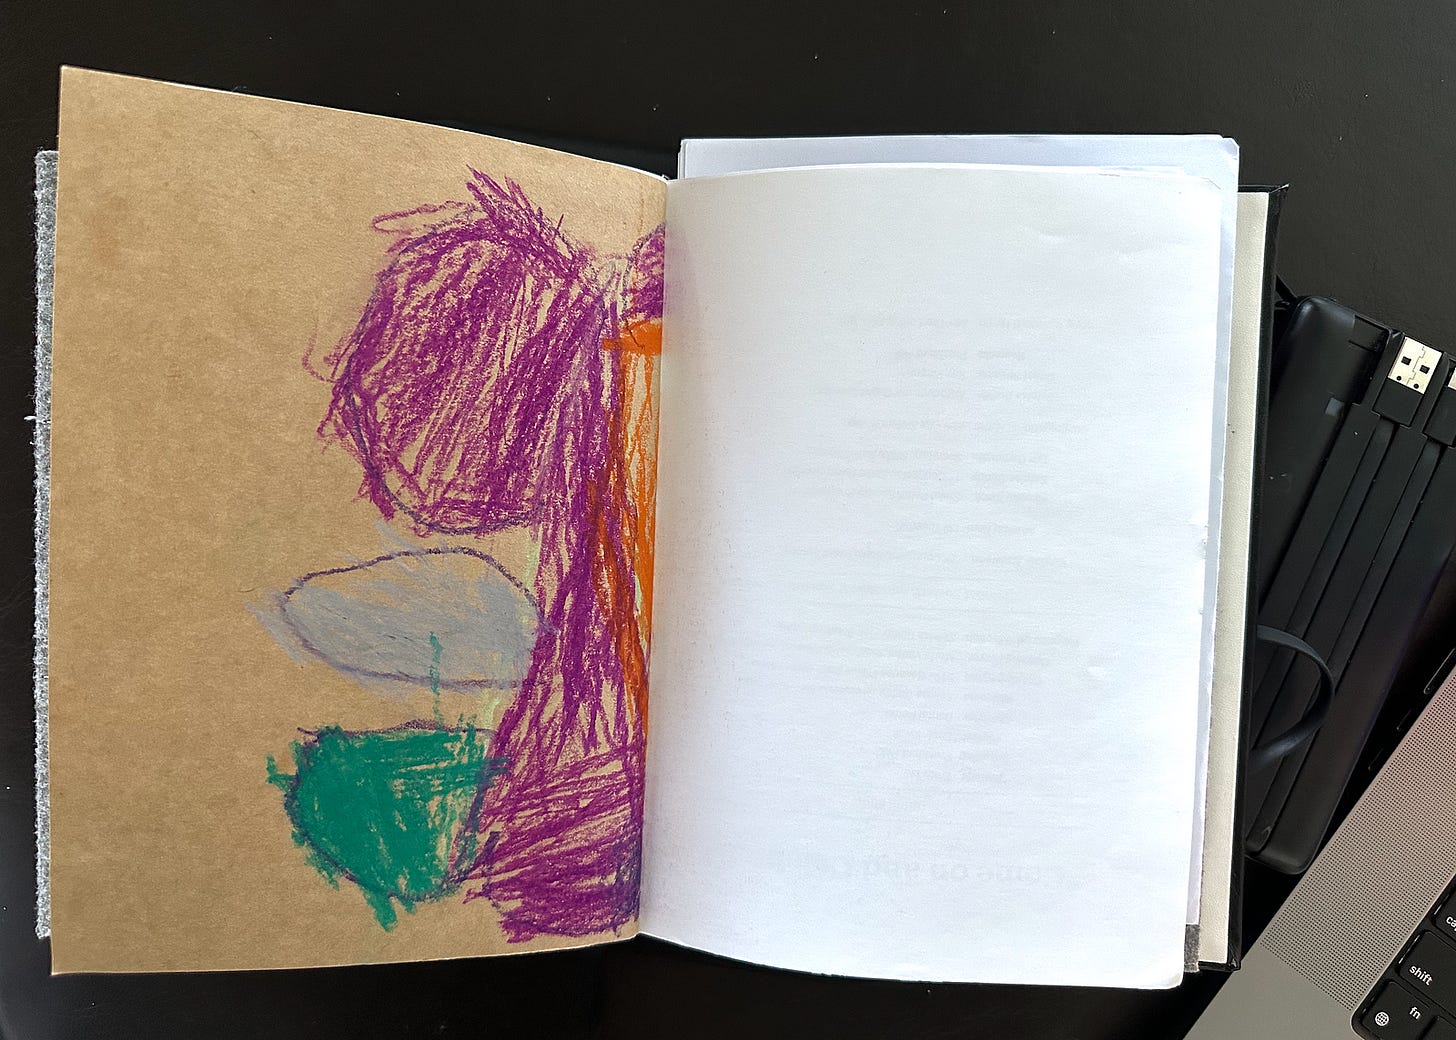 An open notebook on a dark background, with a child’s crayon drawing on brown paper on the left hand page.